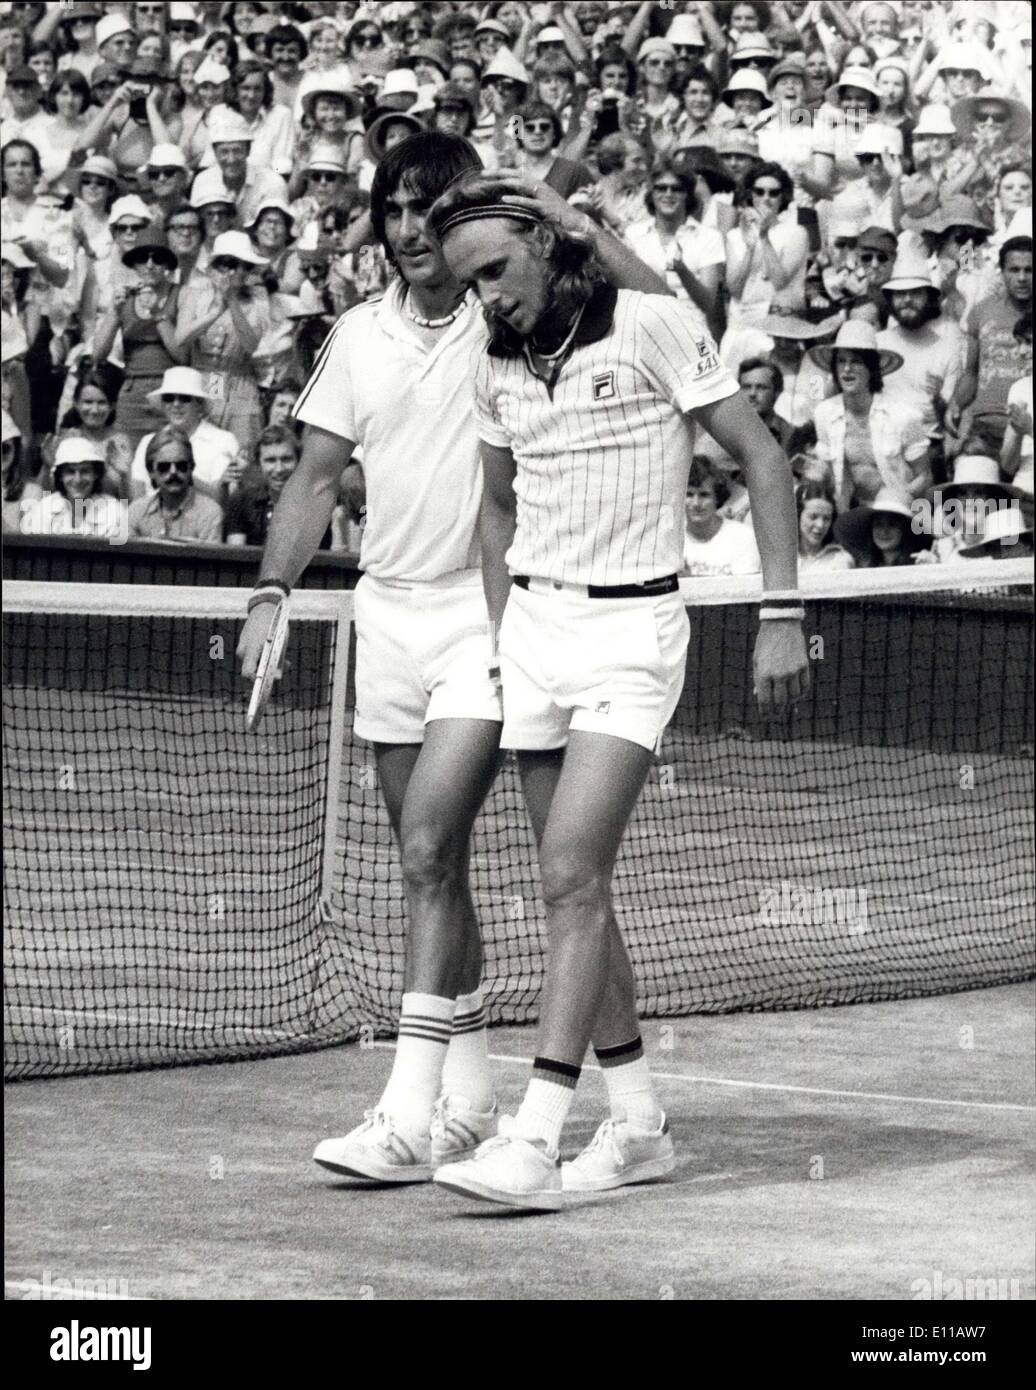 Jul. 03, 1976 - BJORN BORG OF SWEDEN IS THE 1976 WIMBLEDON SINGLES CHAMPION. This afternoon on the centre court at Wimbledon BJORN BORG of Sweden won the Men's Singles title when beating L NASTASE of Rumania 6-4,6-2,9-7. PHOTO SHOWS: NASTASE congratulation BORG after the match on the centre court today. Stock Photo